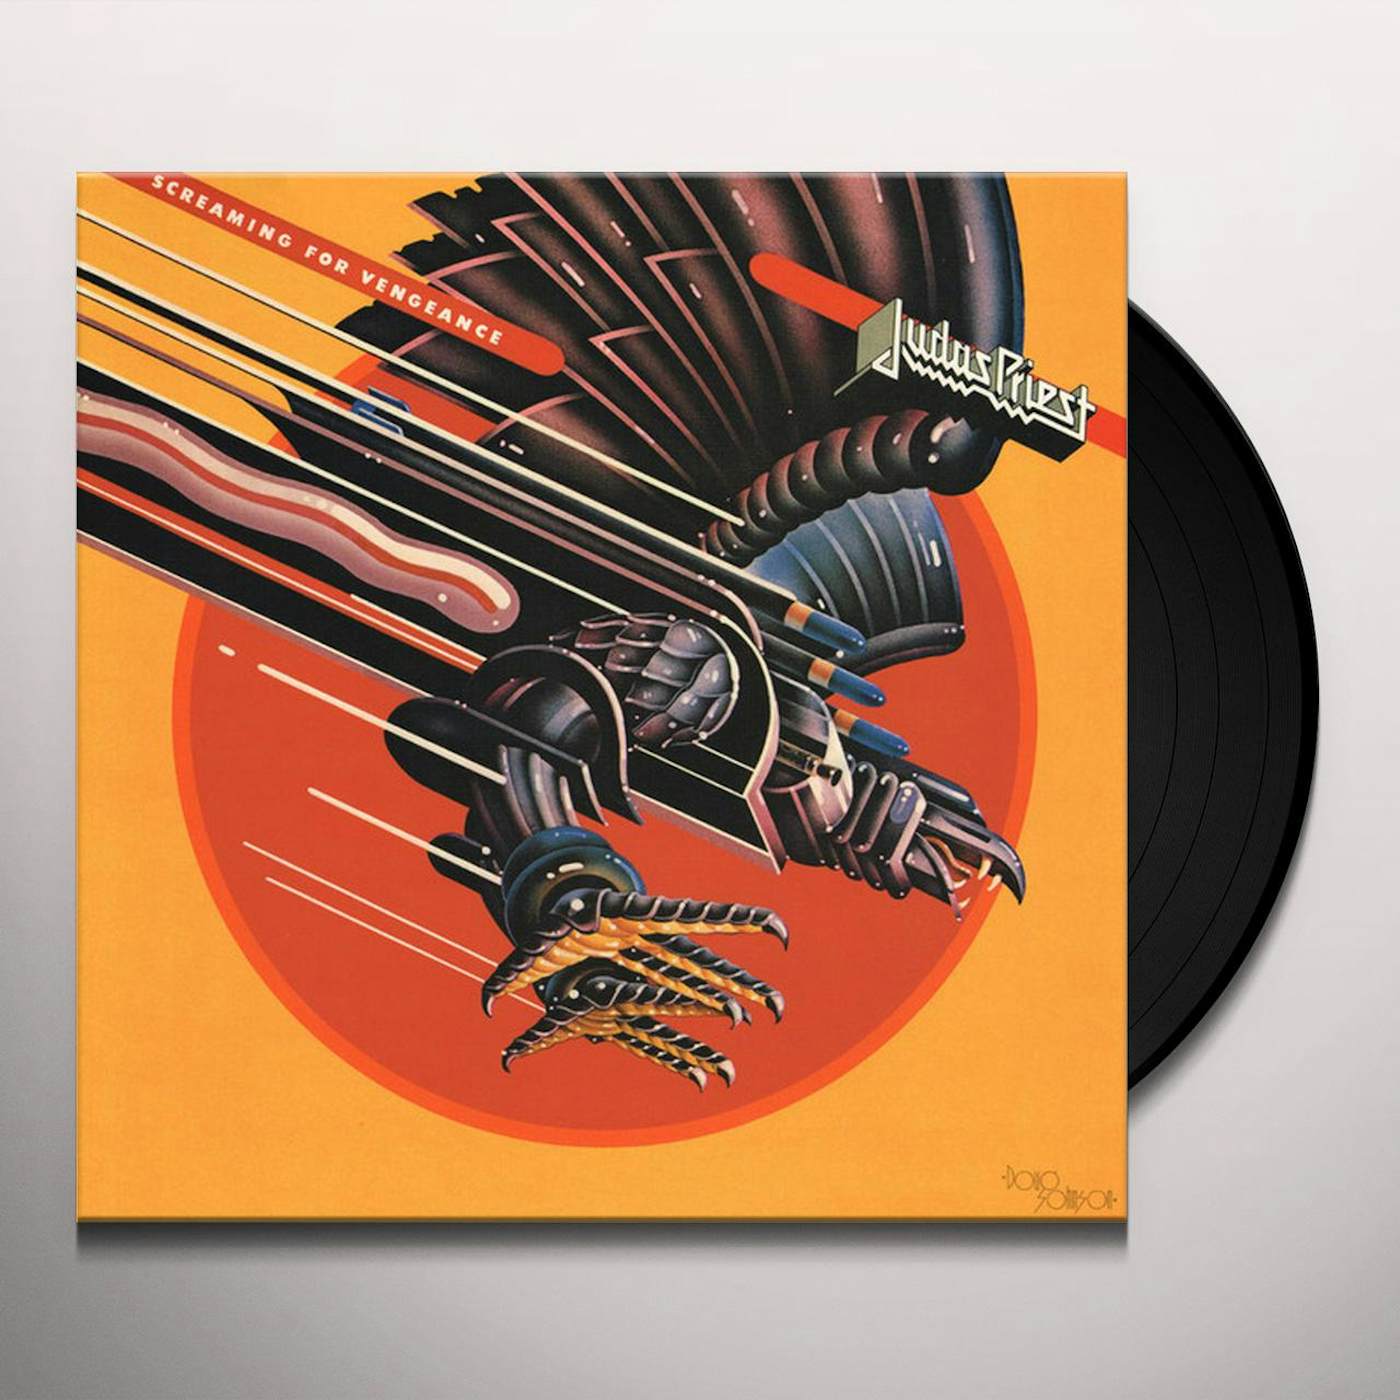 Judas Priest - Screaming For Vengeance: 30th Anniversary Edition (Picture  Disc Vinyl LP) - Music Direct